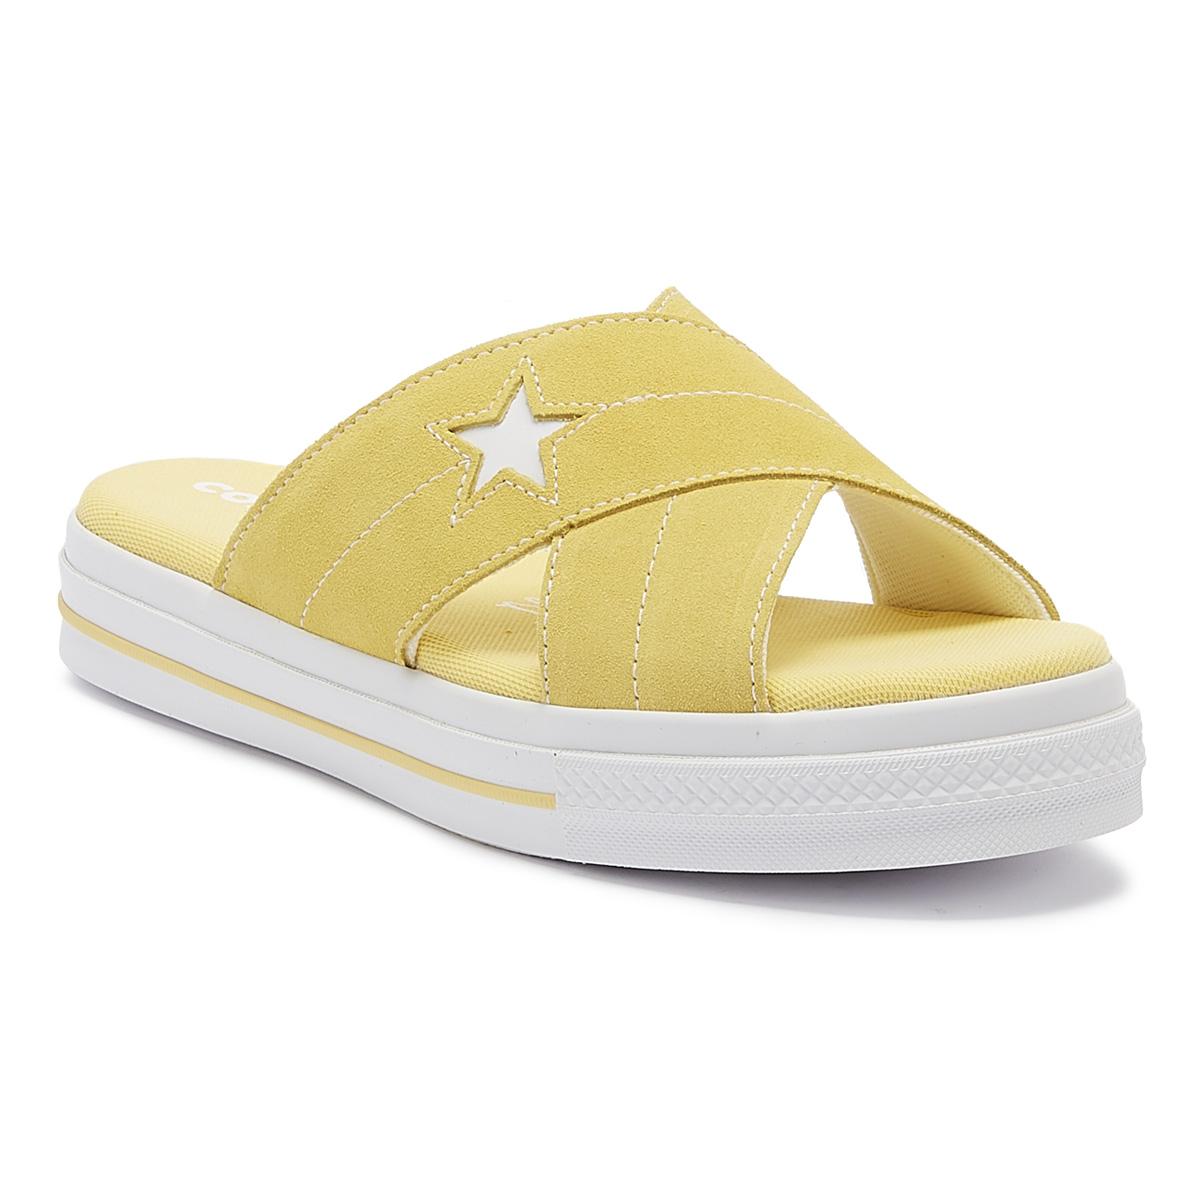 Converse Suede One Star Yellow Sandals 